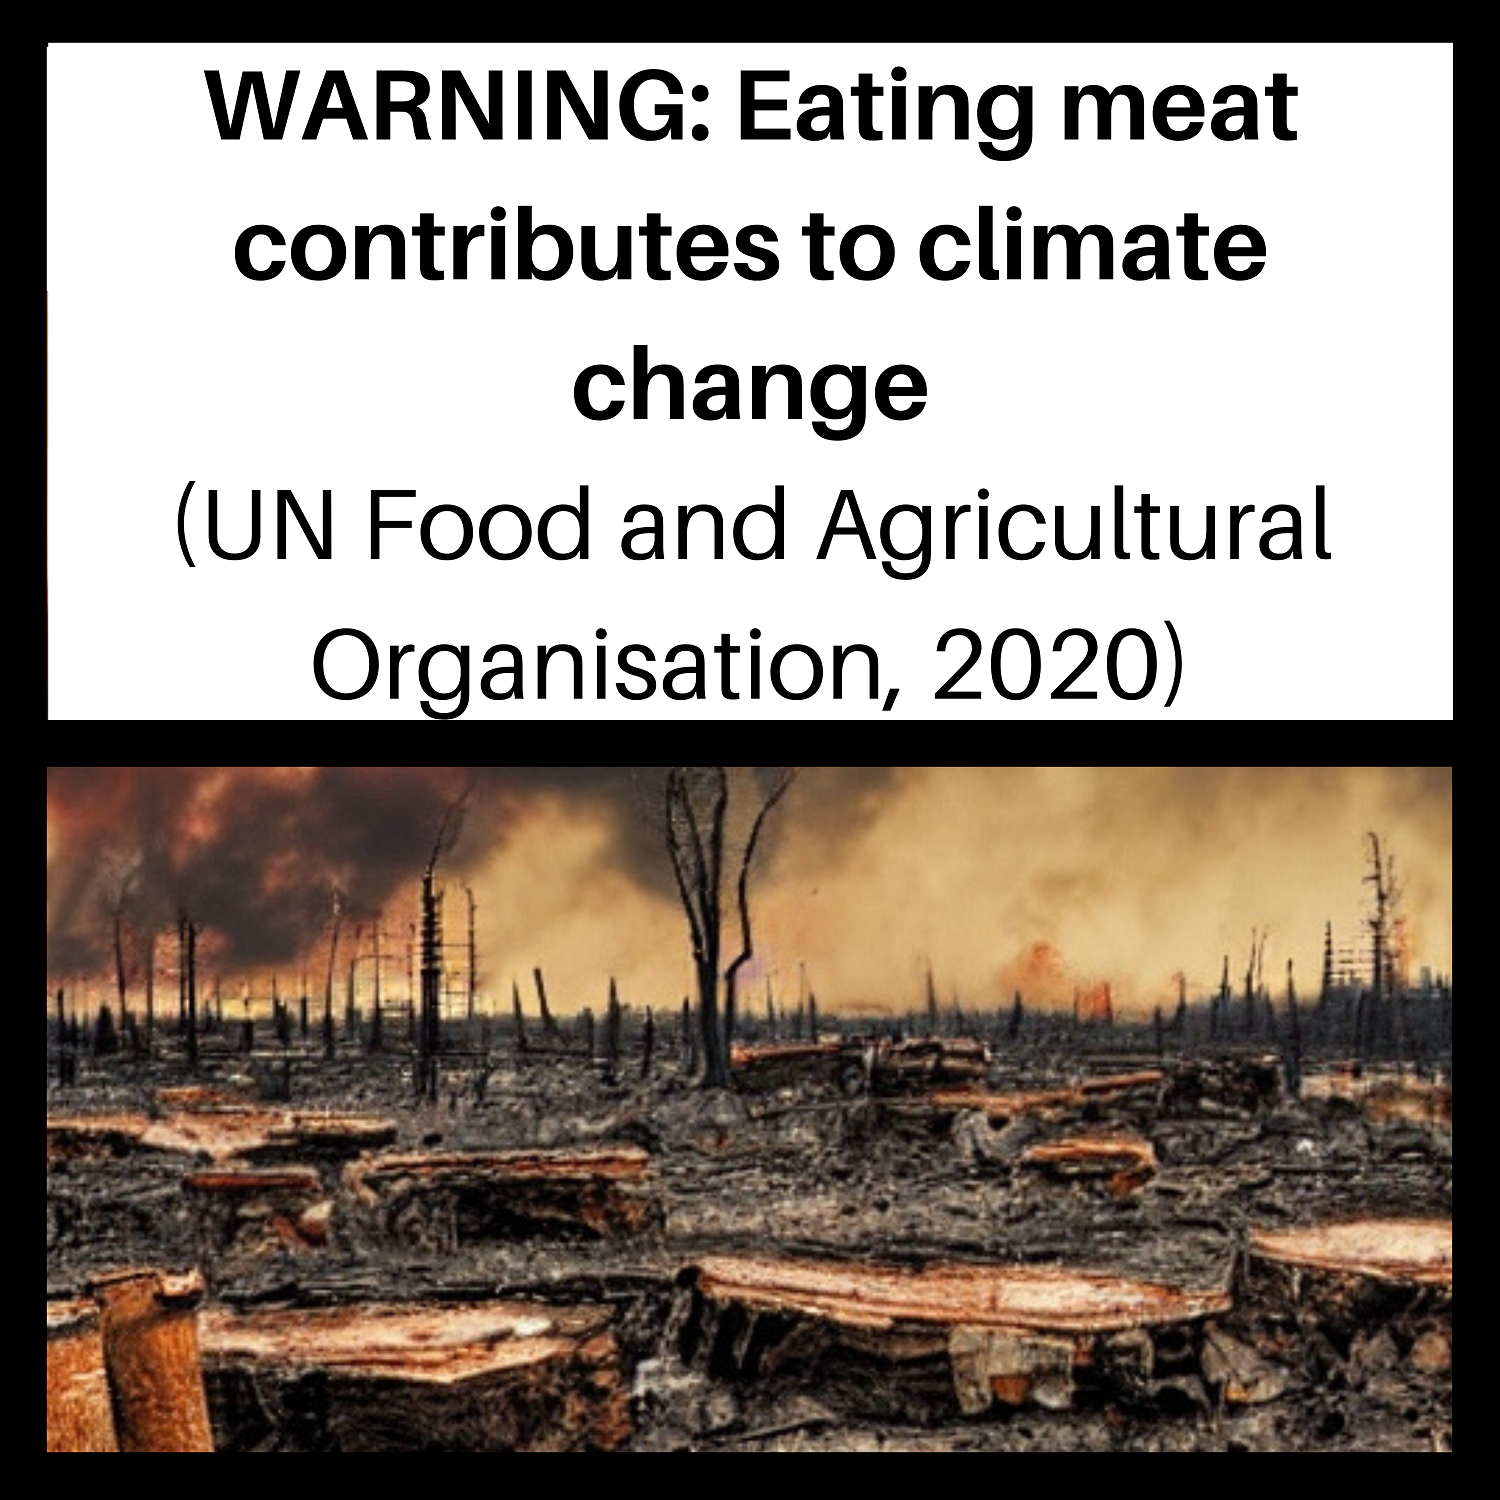 A meat warning label stating that eating mean contributes to climate change with an image of fossil fuels polluting the air